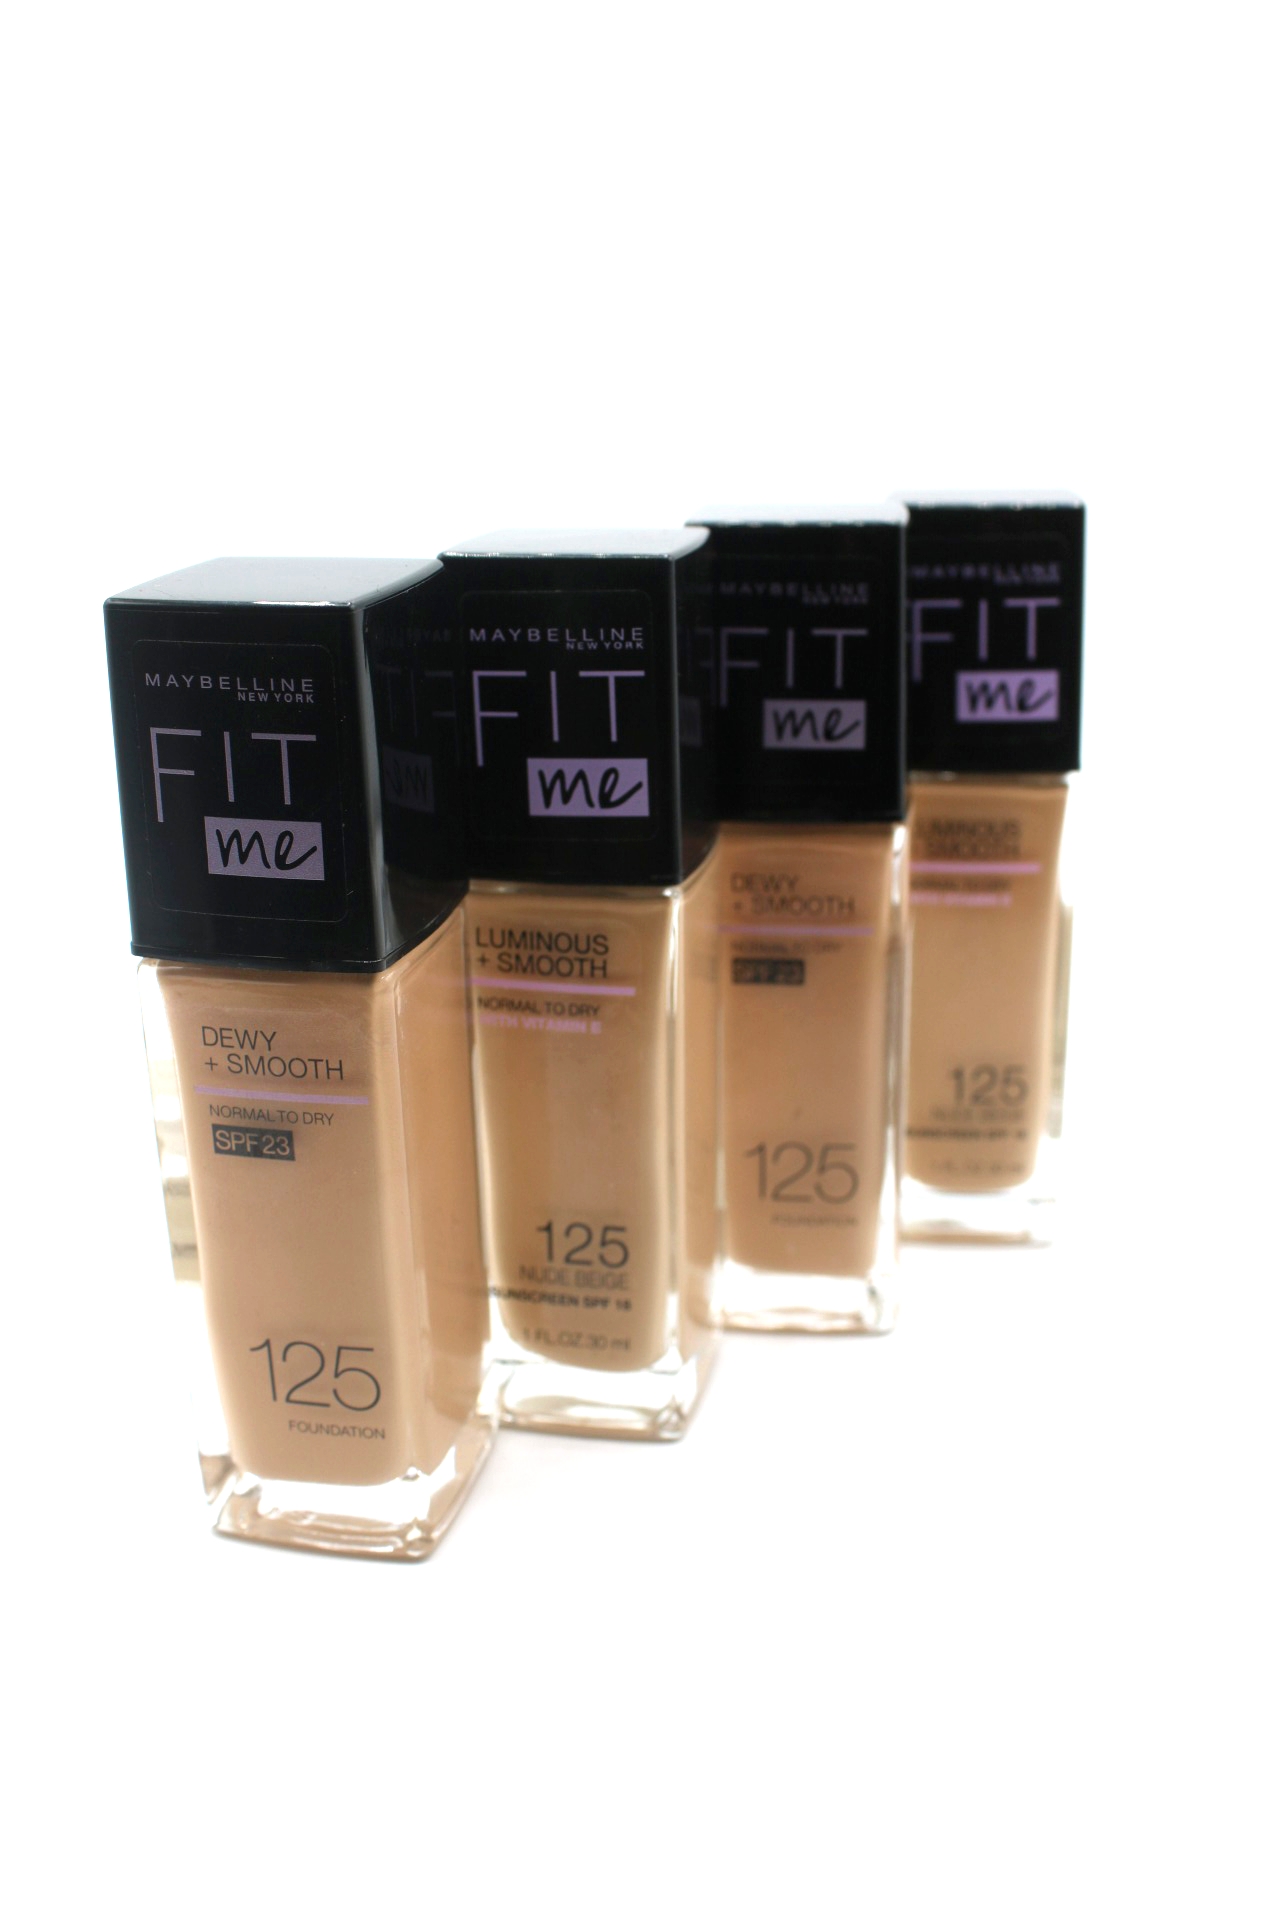 Maybelline Fit Me  Foundation  Dewy +Smooth  SPF 23  #125